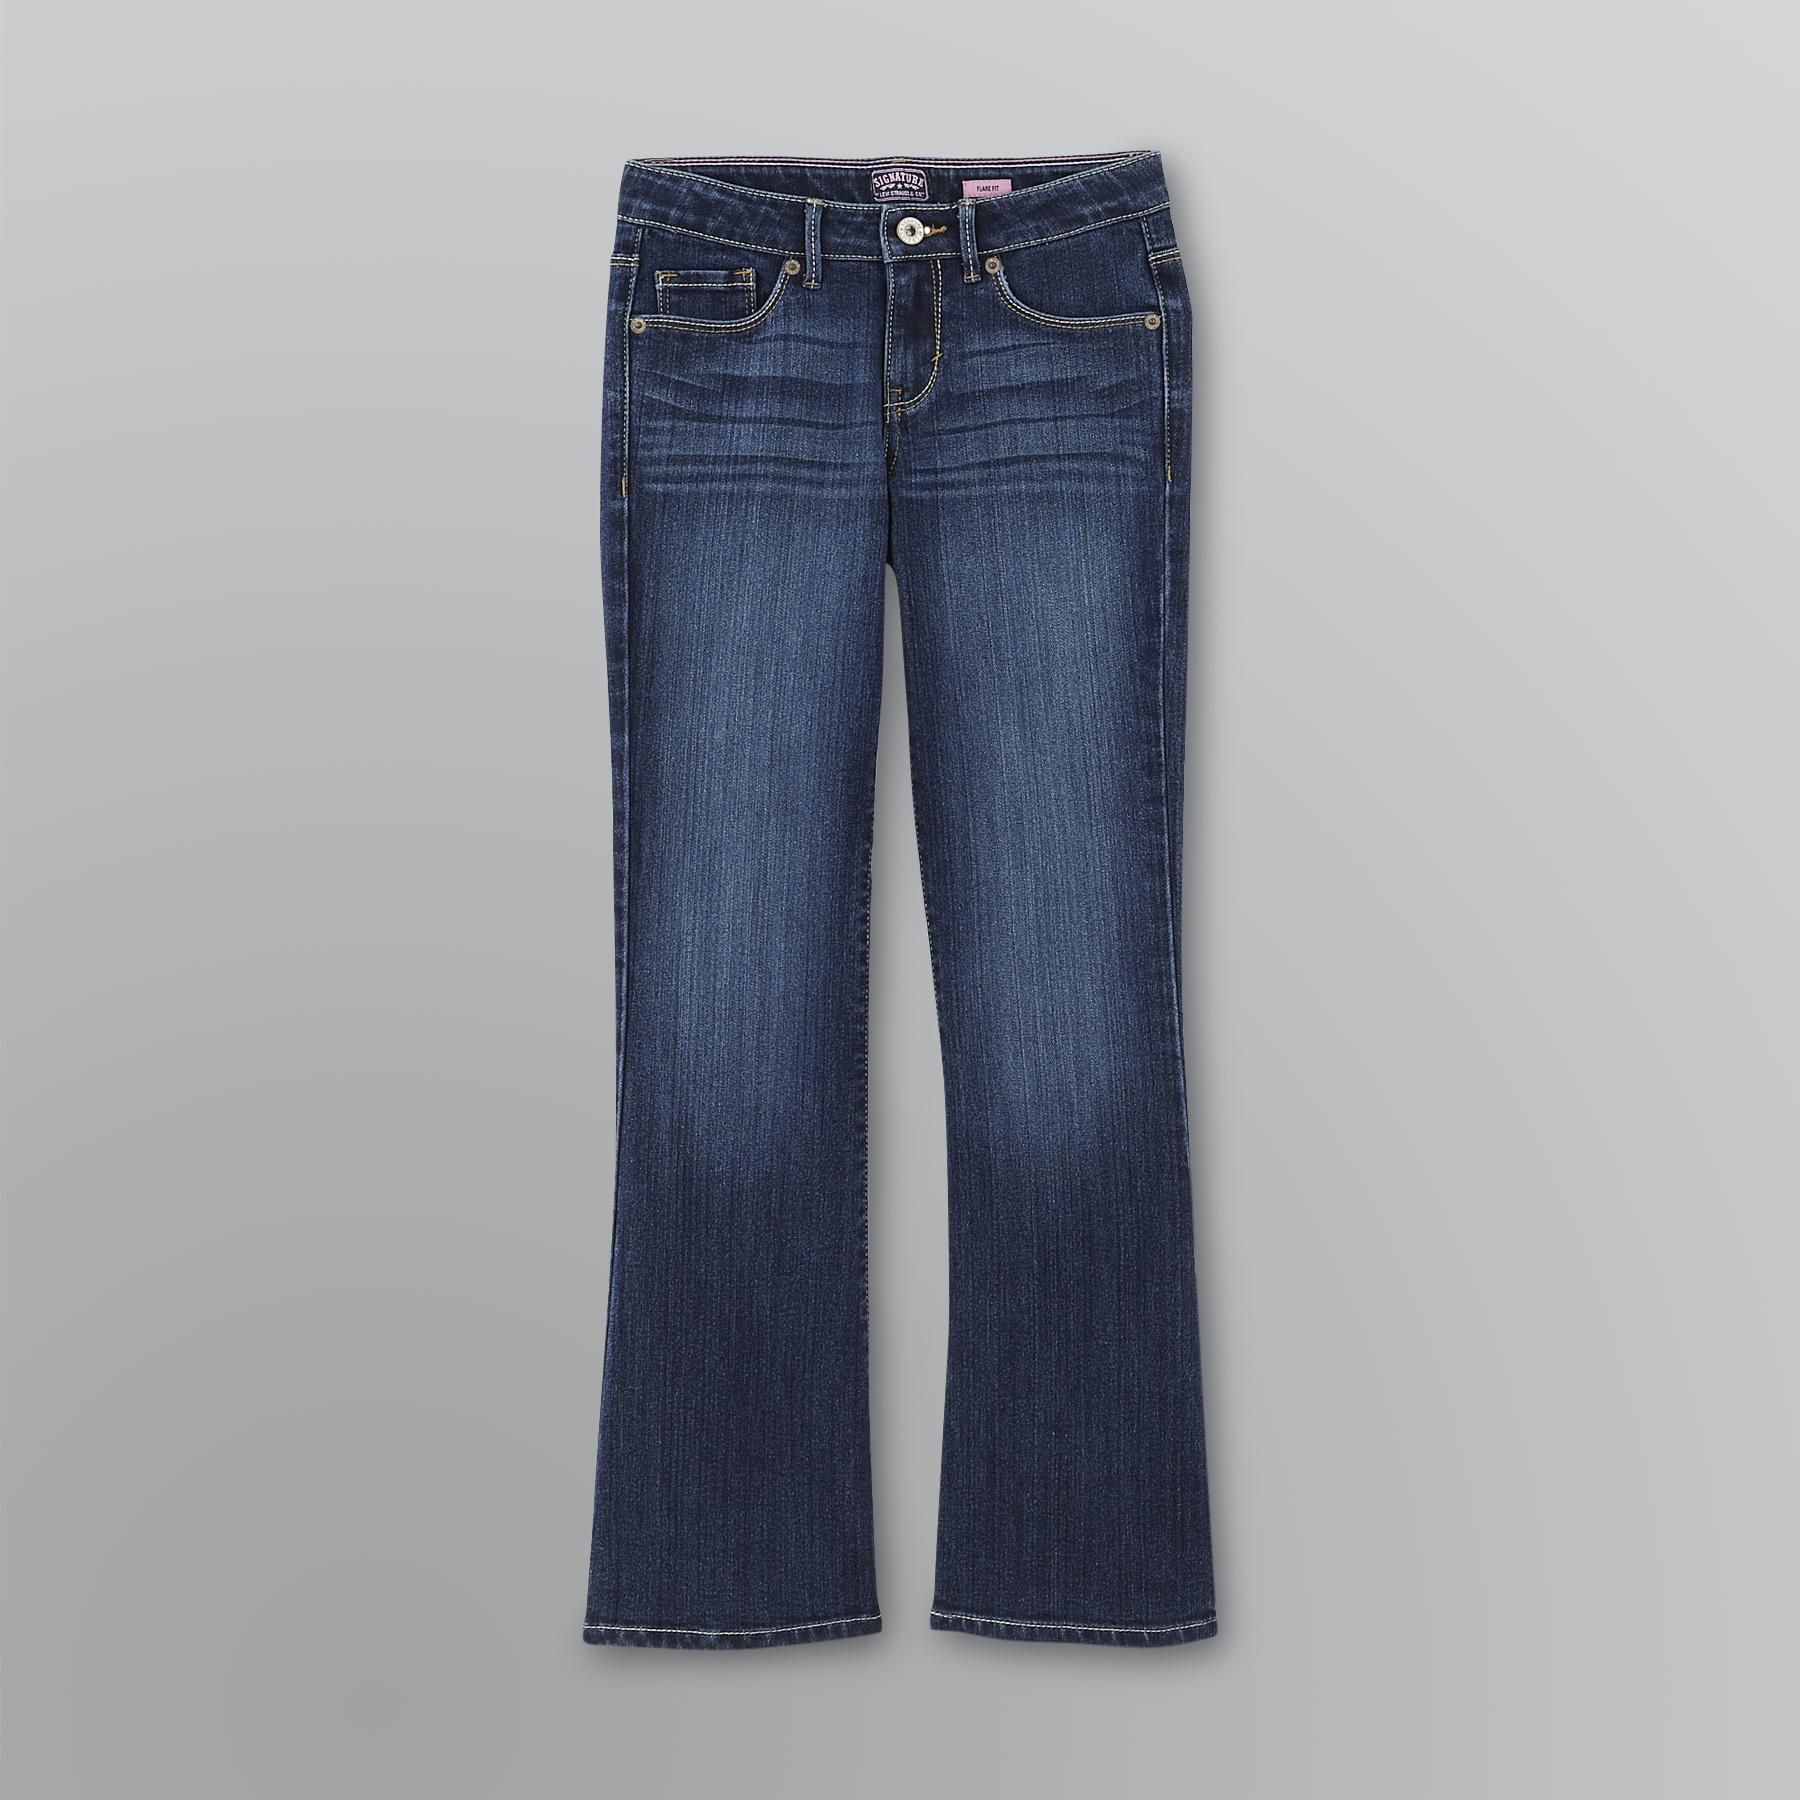 Signature by Levi Strauss & Co. Girl's Flare Jeans